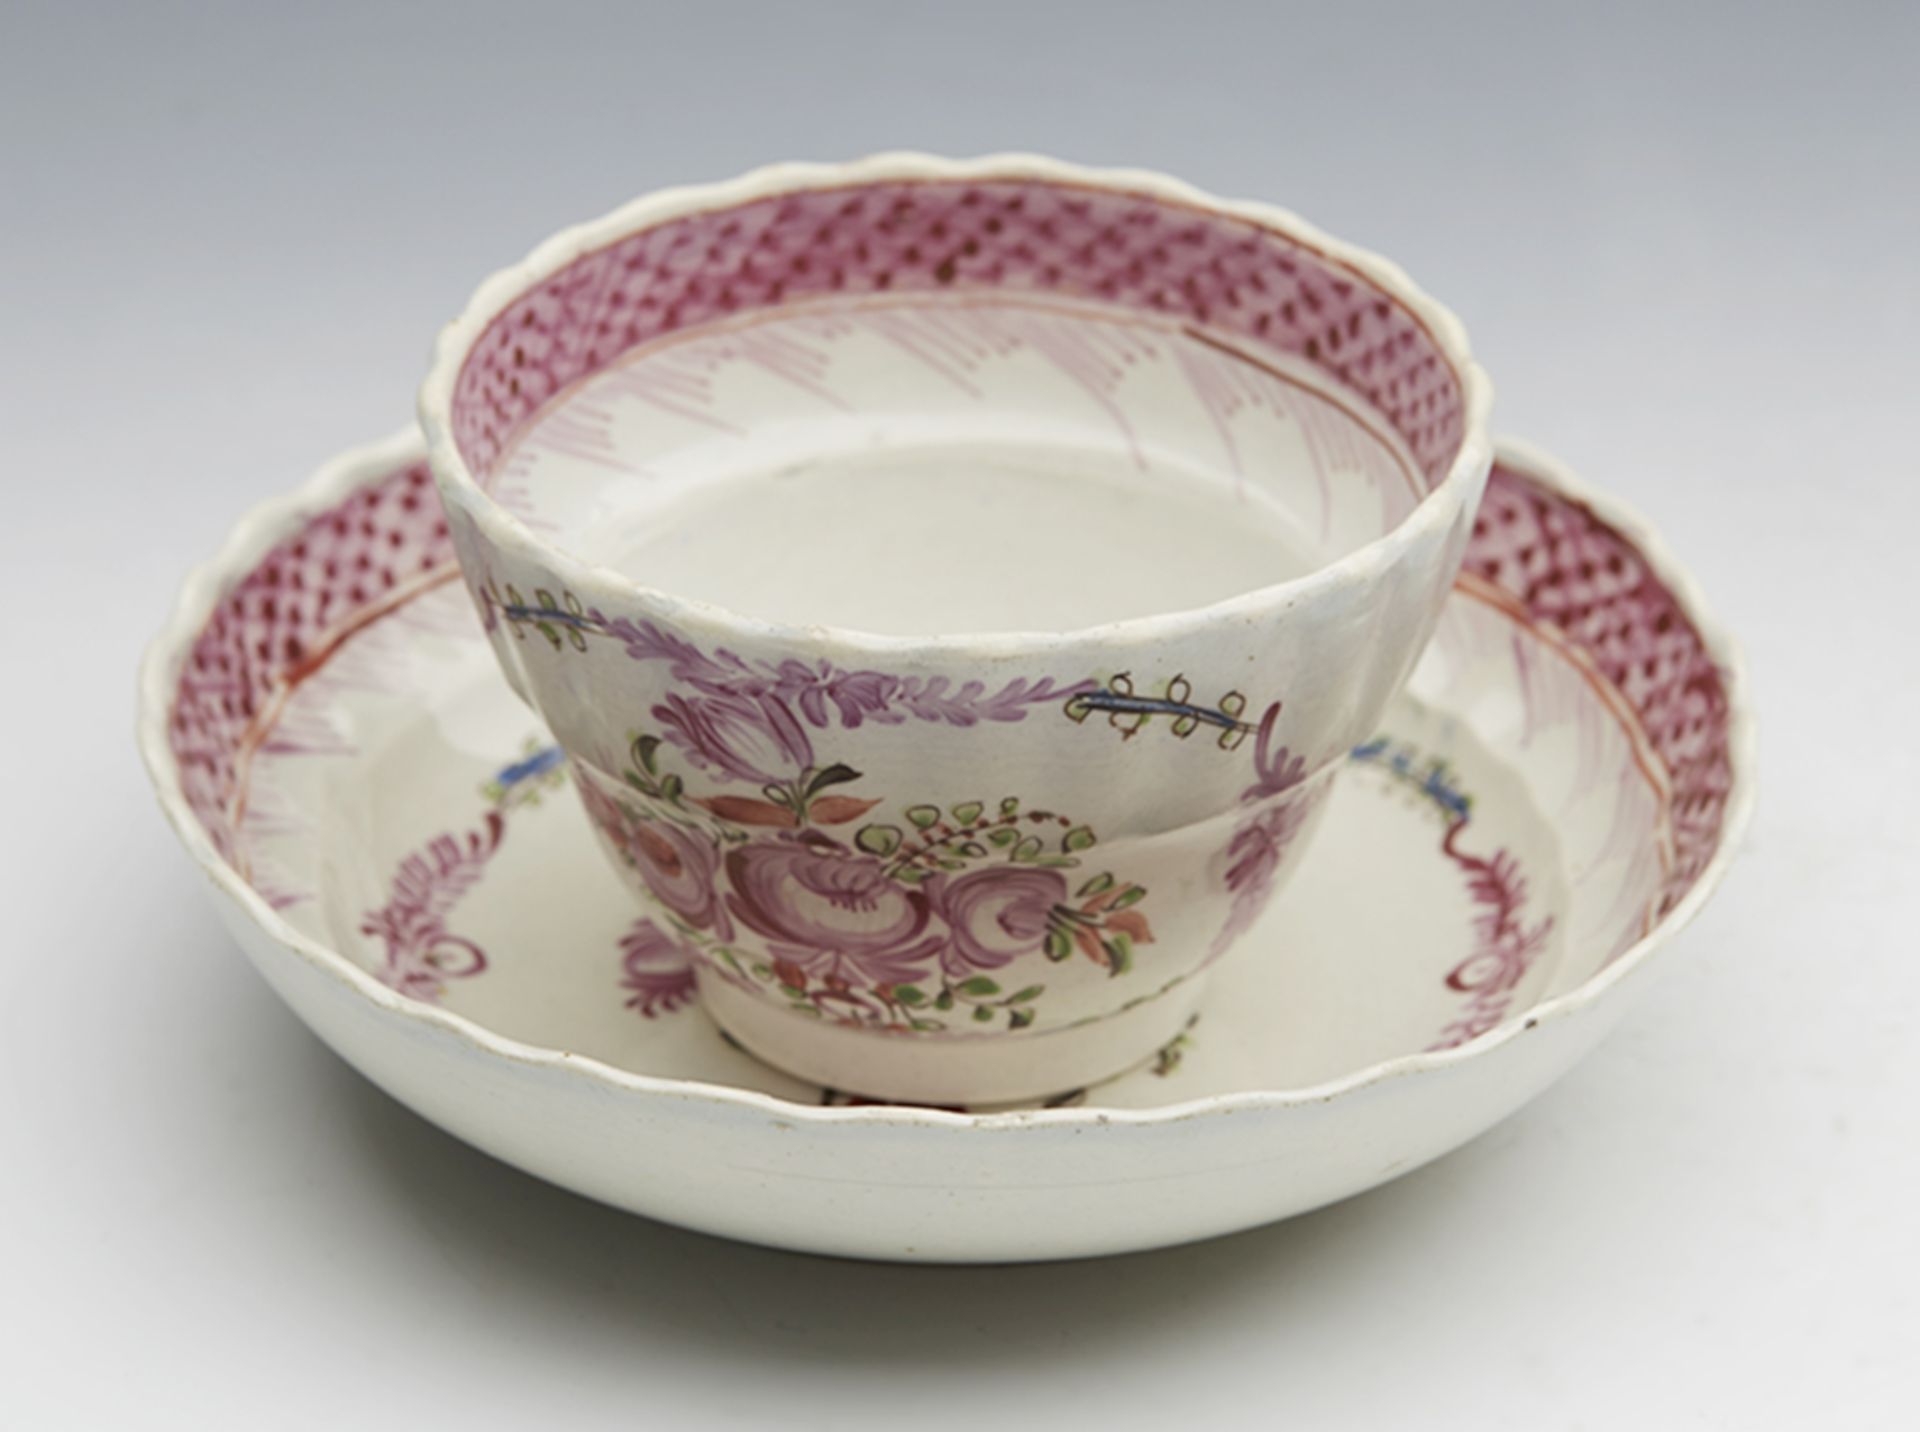 ANTIQUE PEARLWARE FLORAL PAINTED TEABOWL AND SAUCER c.1800 - Image 7 of 7